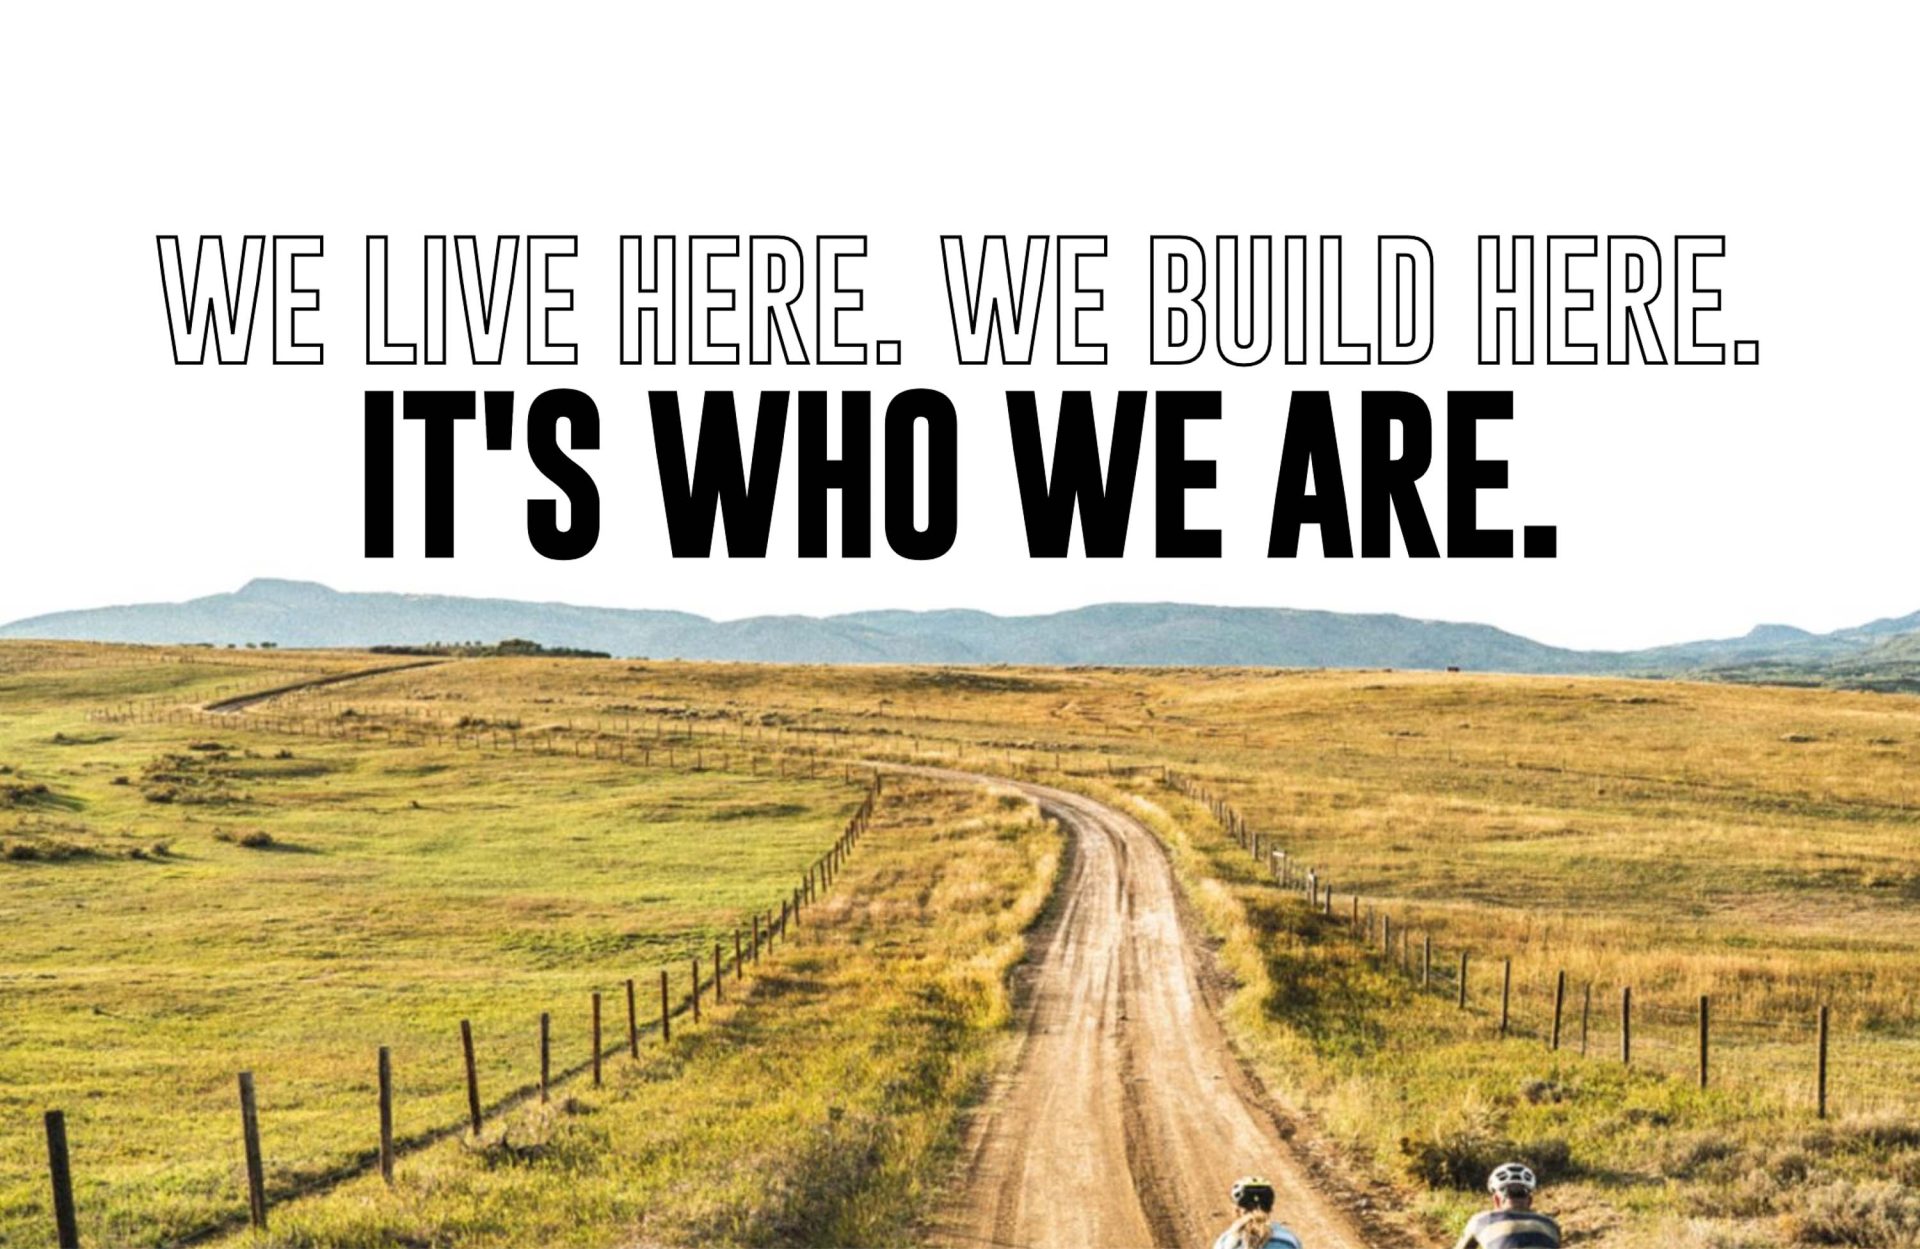 Graphic from the Moots web site with a picture of a dirt road through a field, with mountains in the background, and the marketing copy "We live here. We build here. It's who we are."